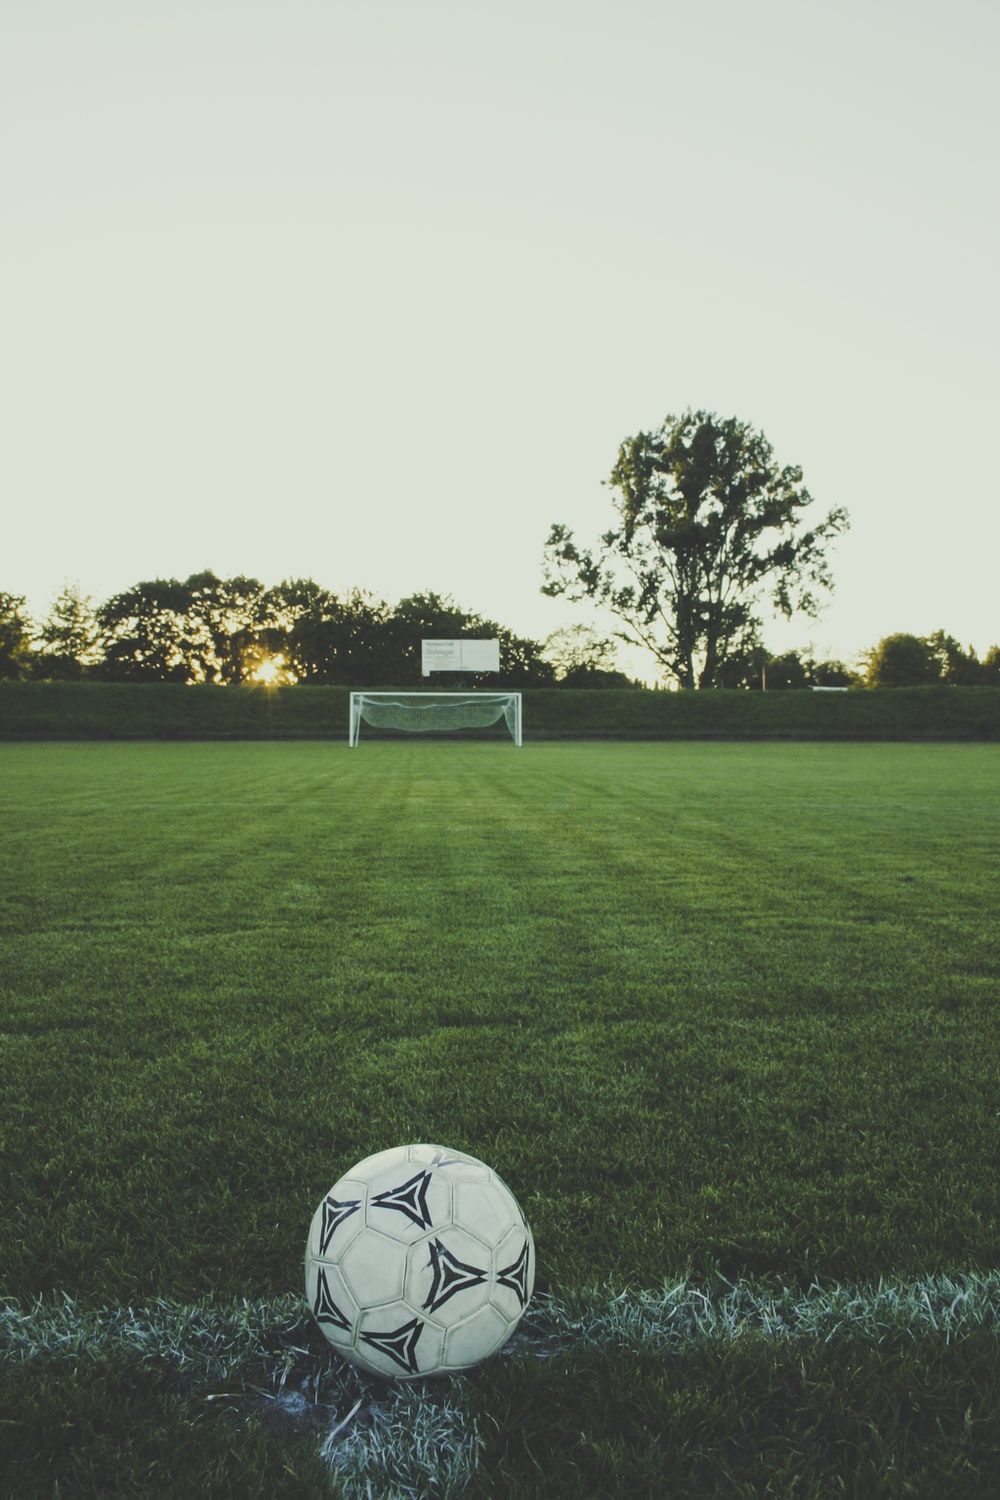 Soccer Goal Picture. Download Free Image